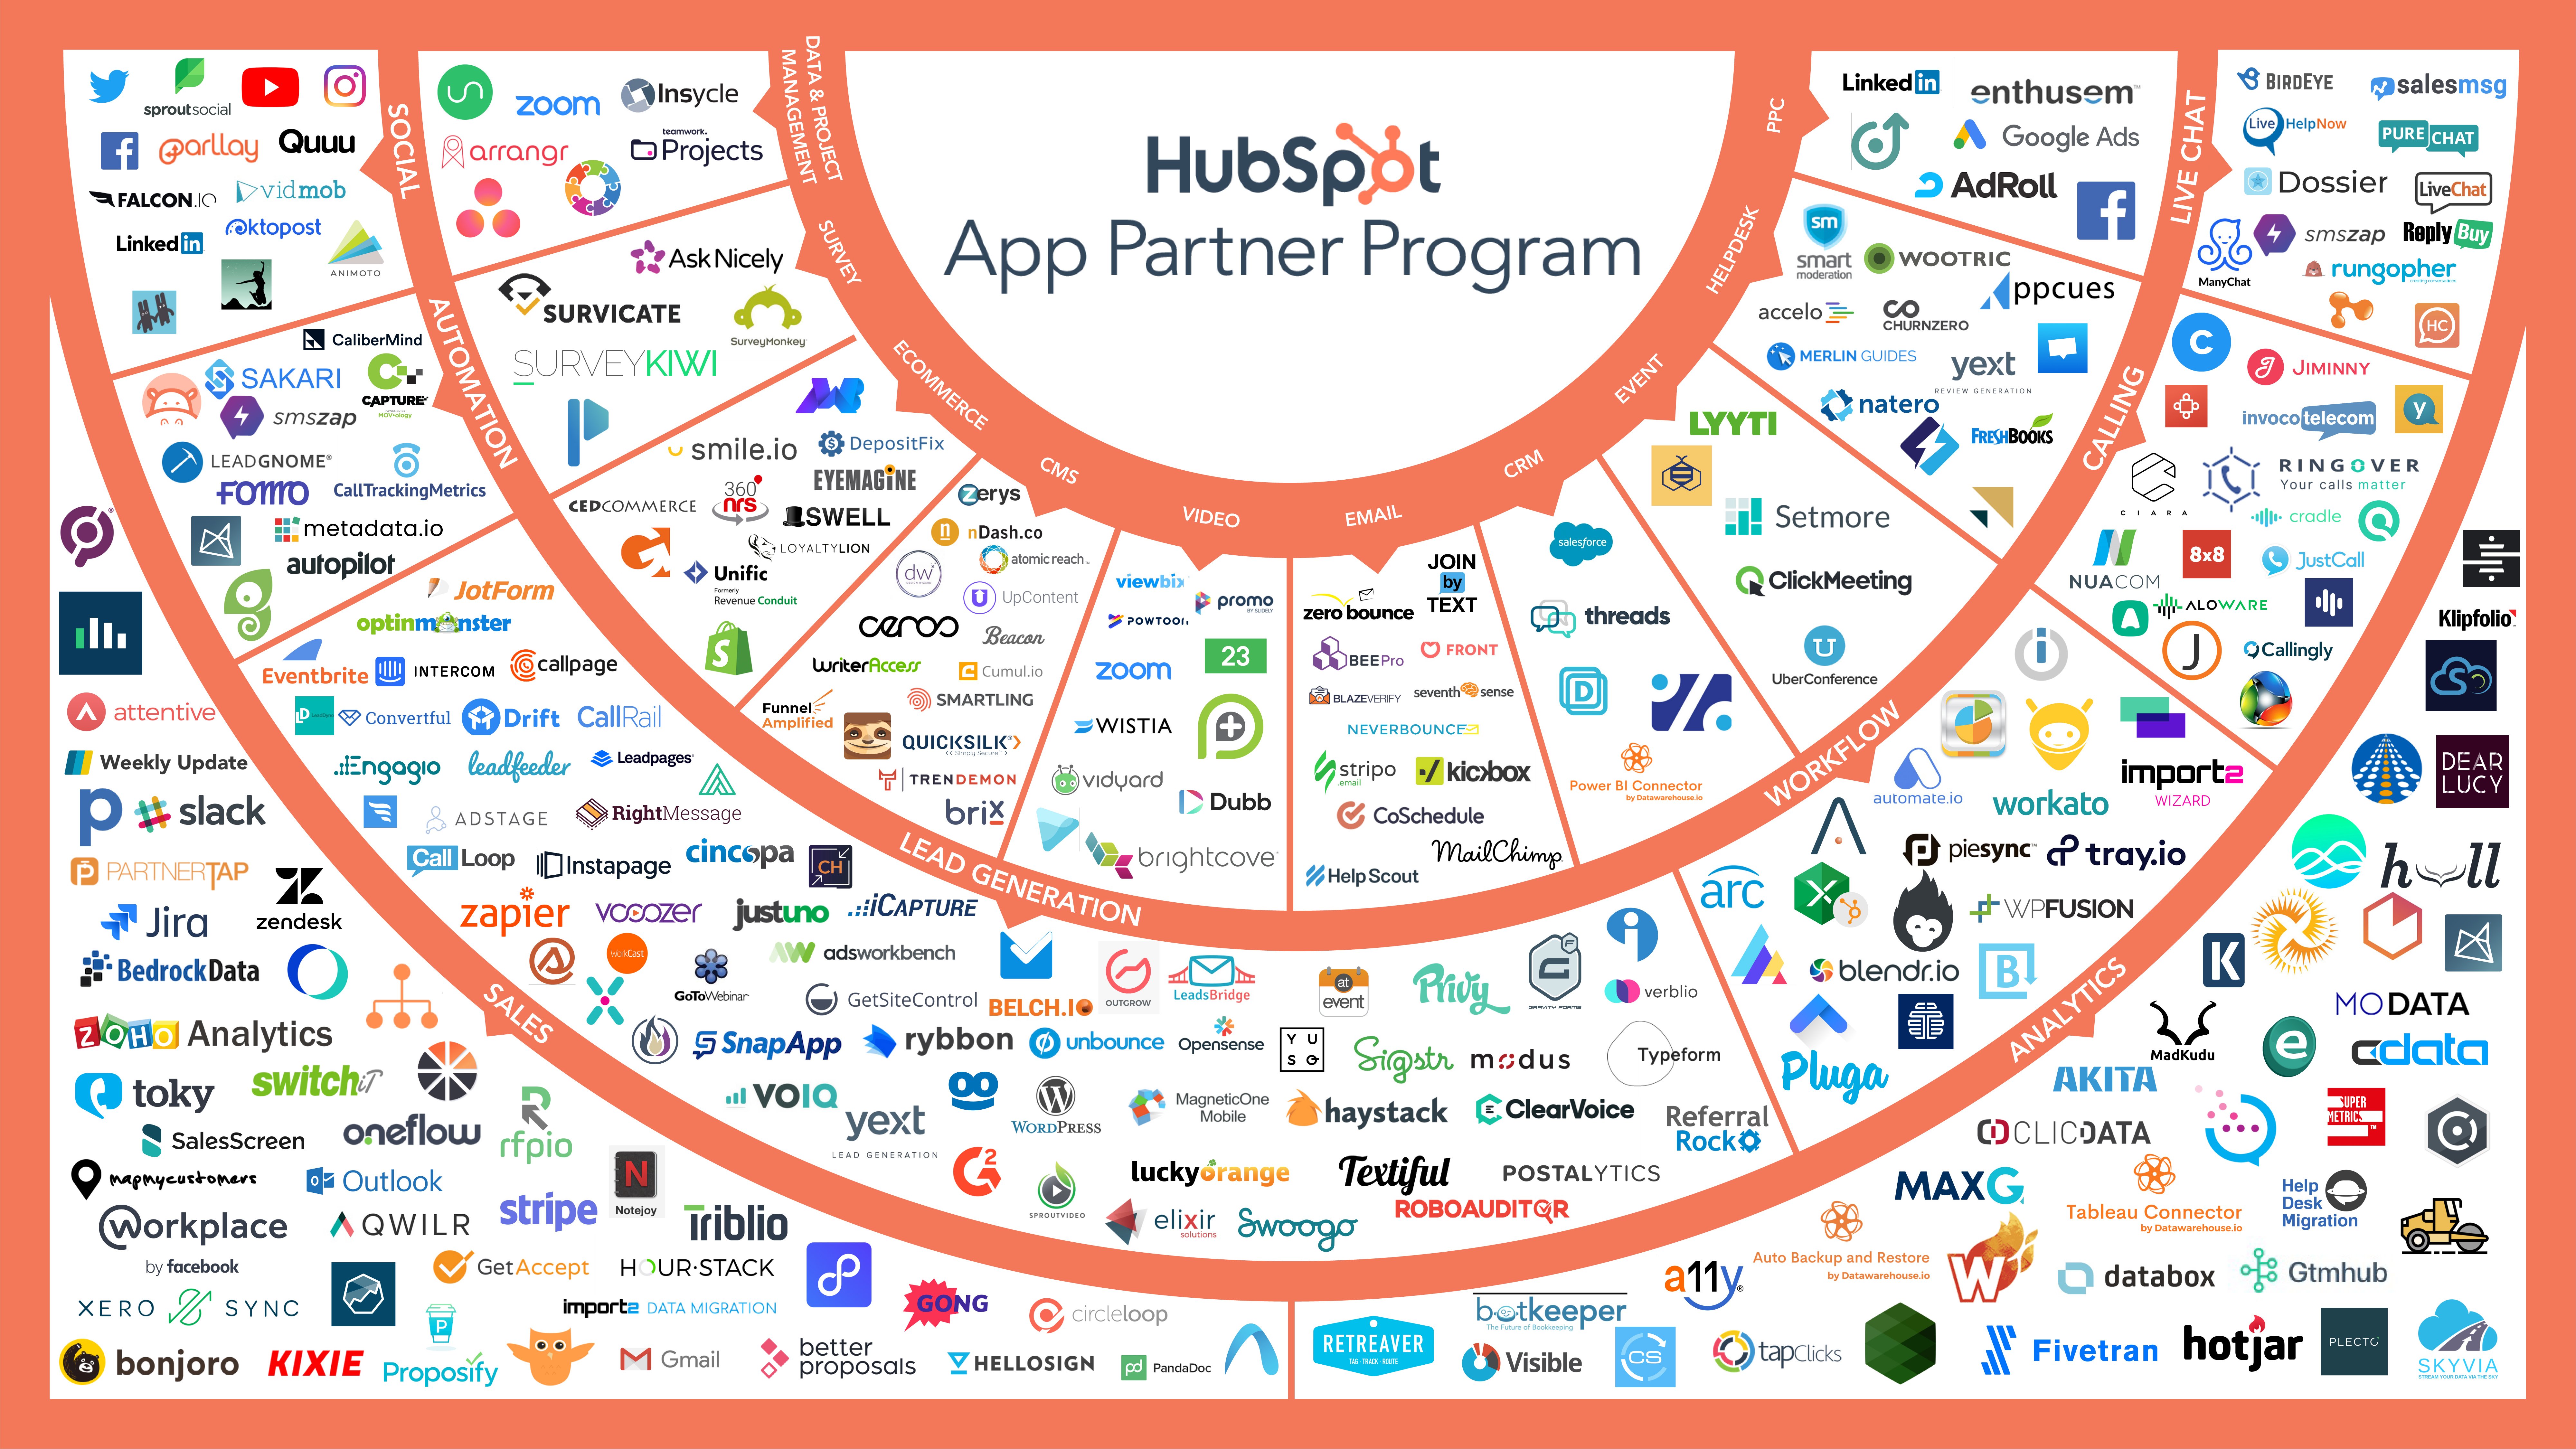 HubspotConnectionGraph_revised-01 (2)